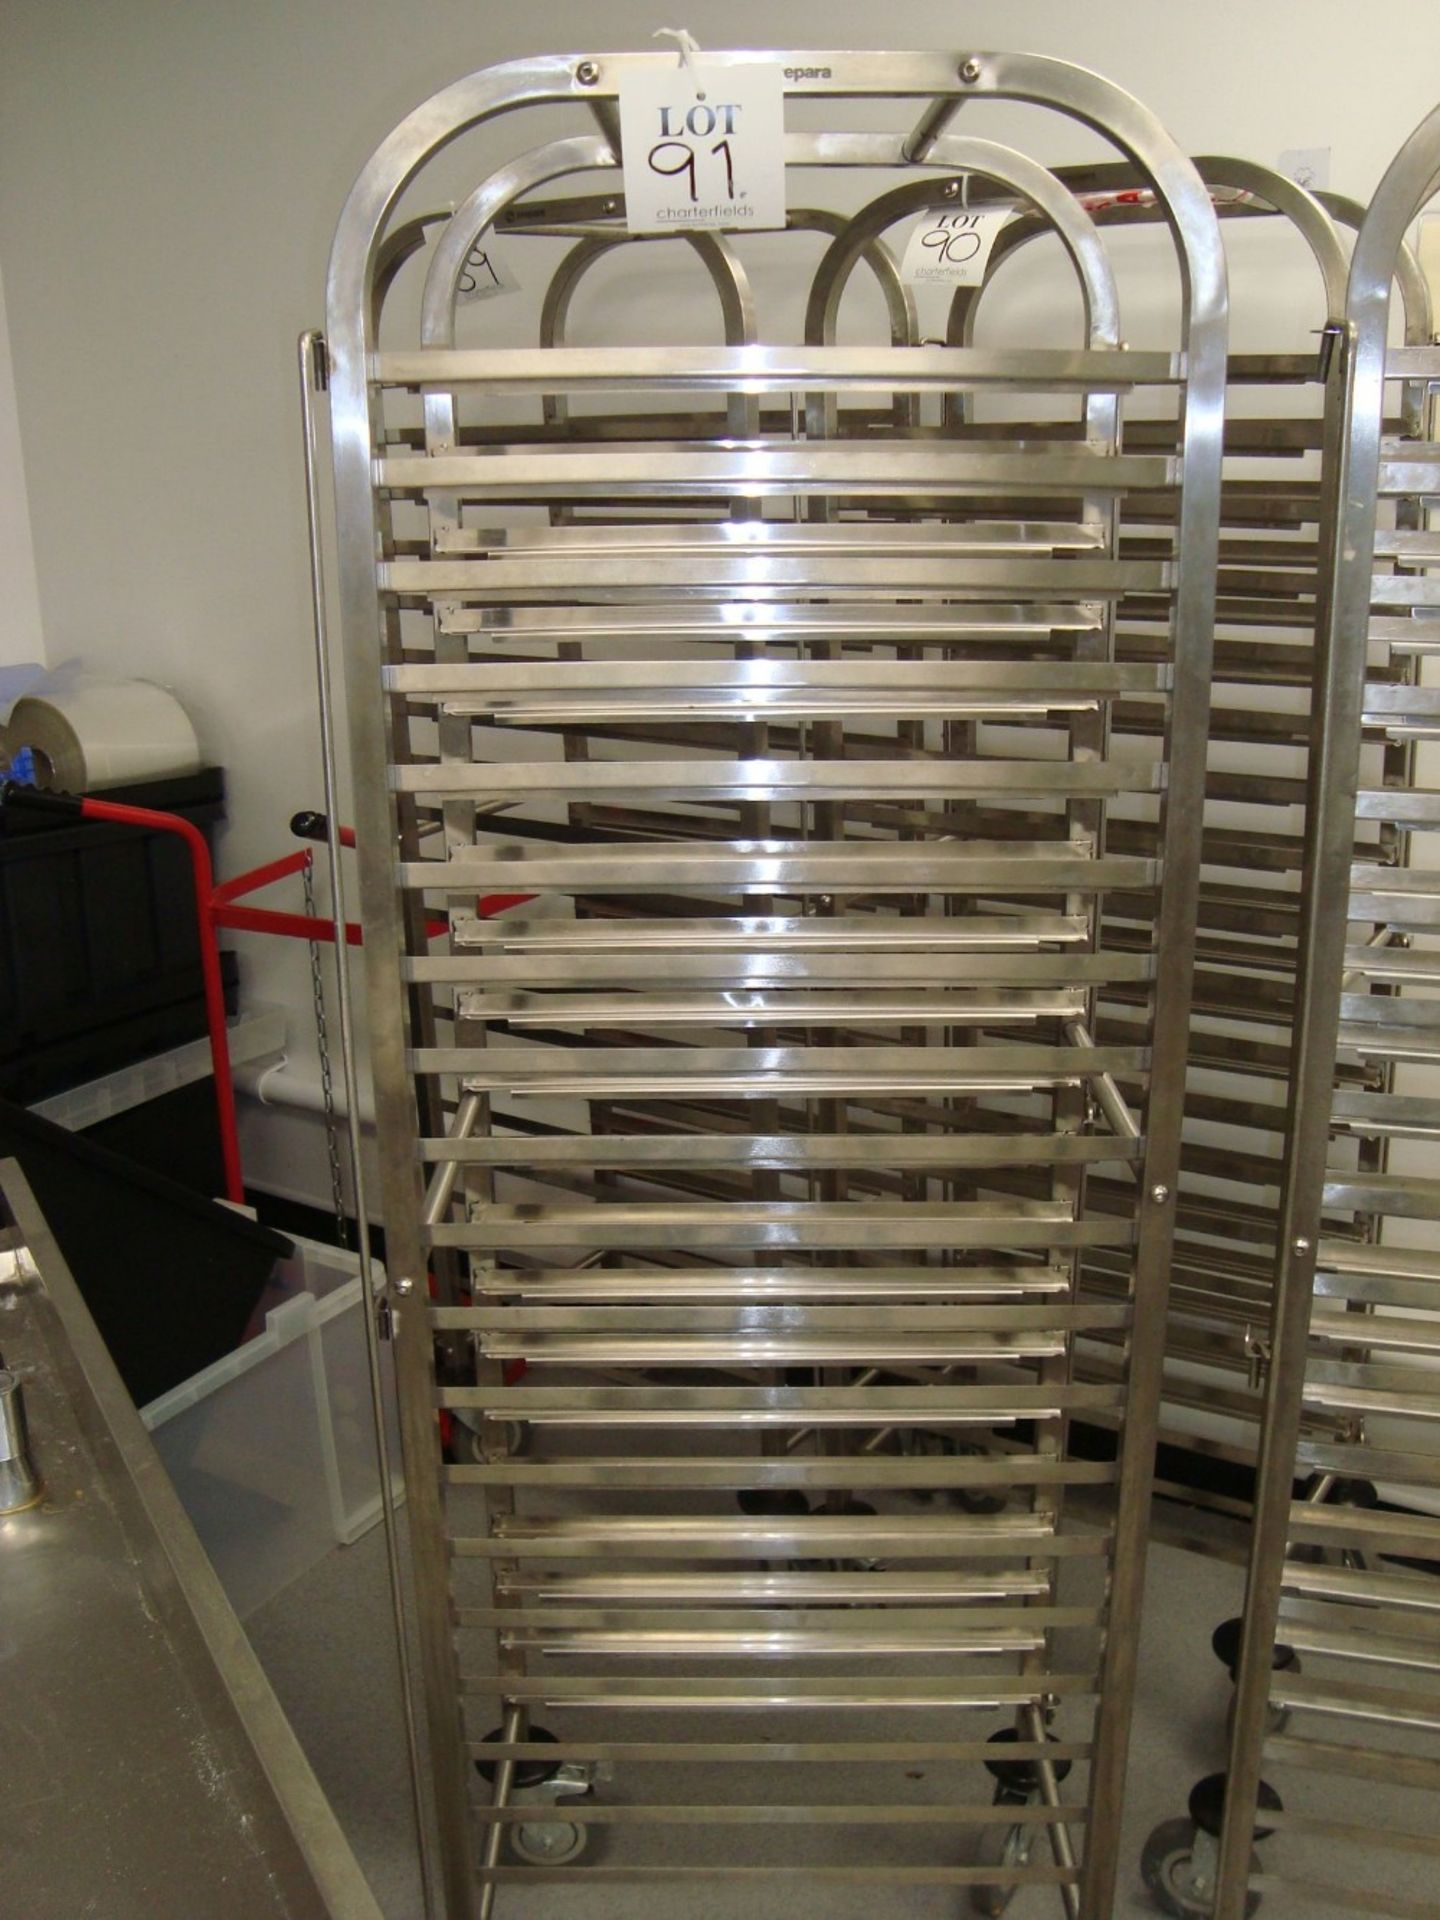 A Prepara stainless steel full height mobile tray rack